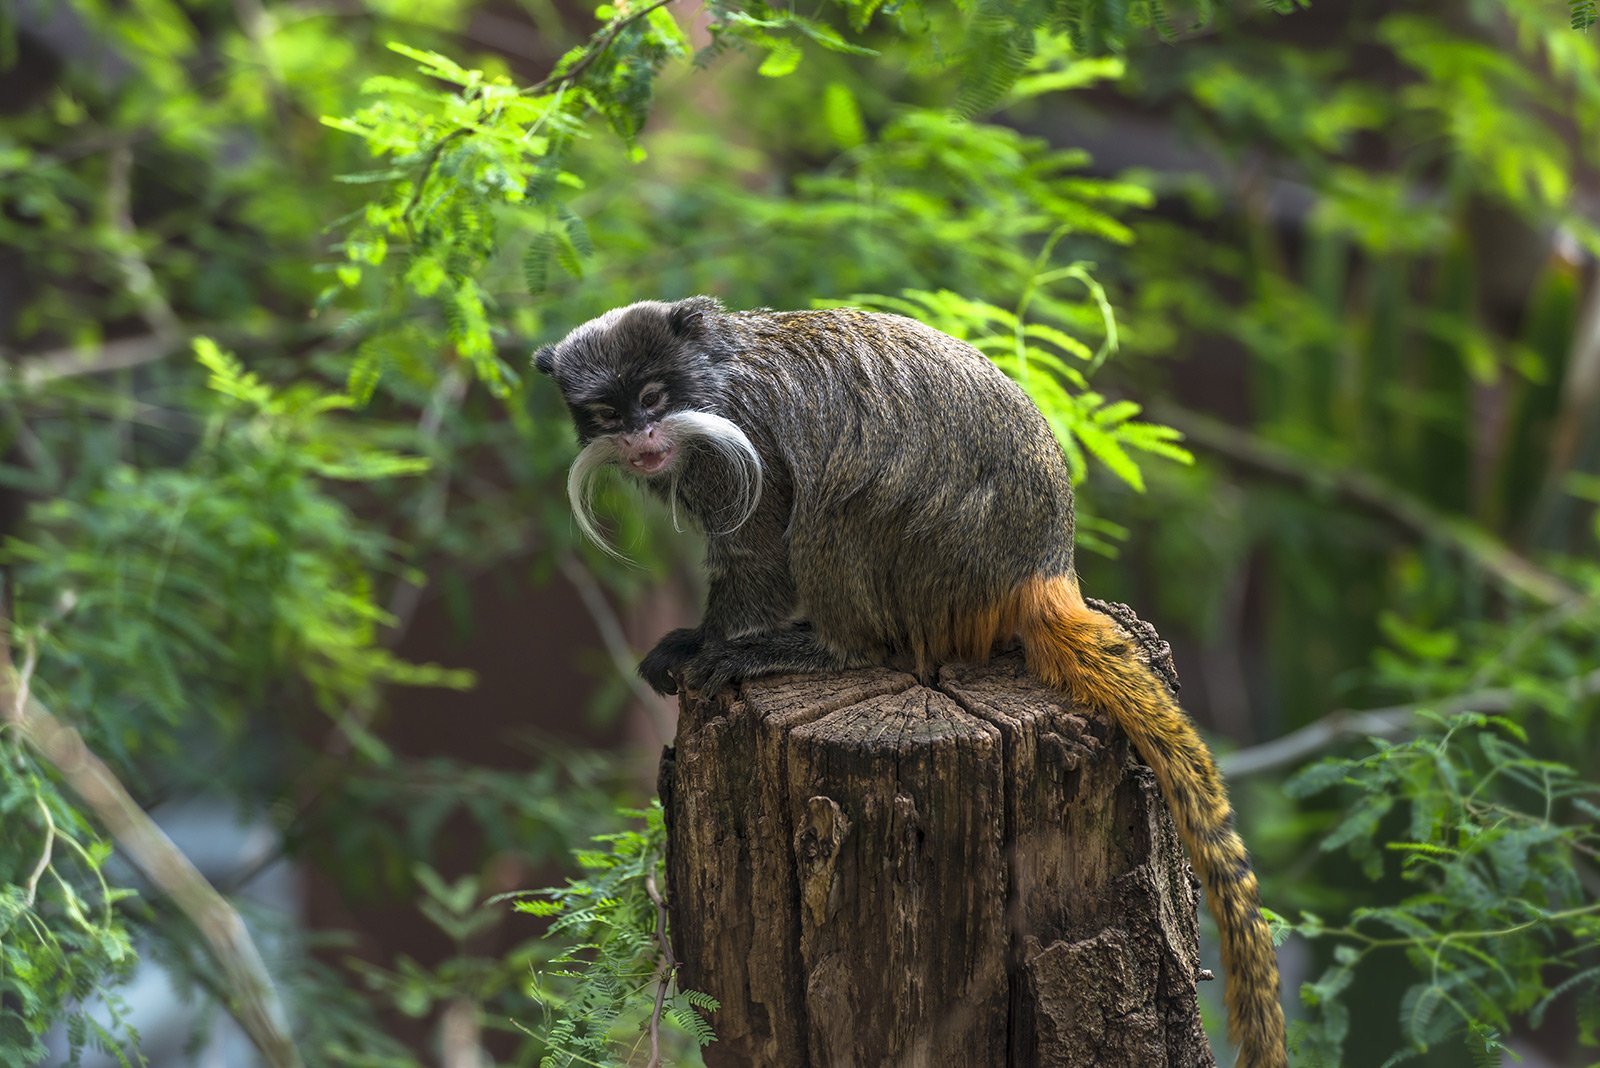 How to see tamarins in Rio de Janeiro